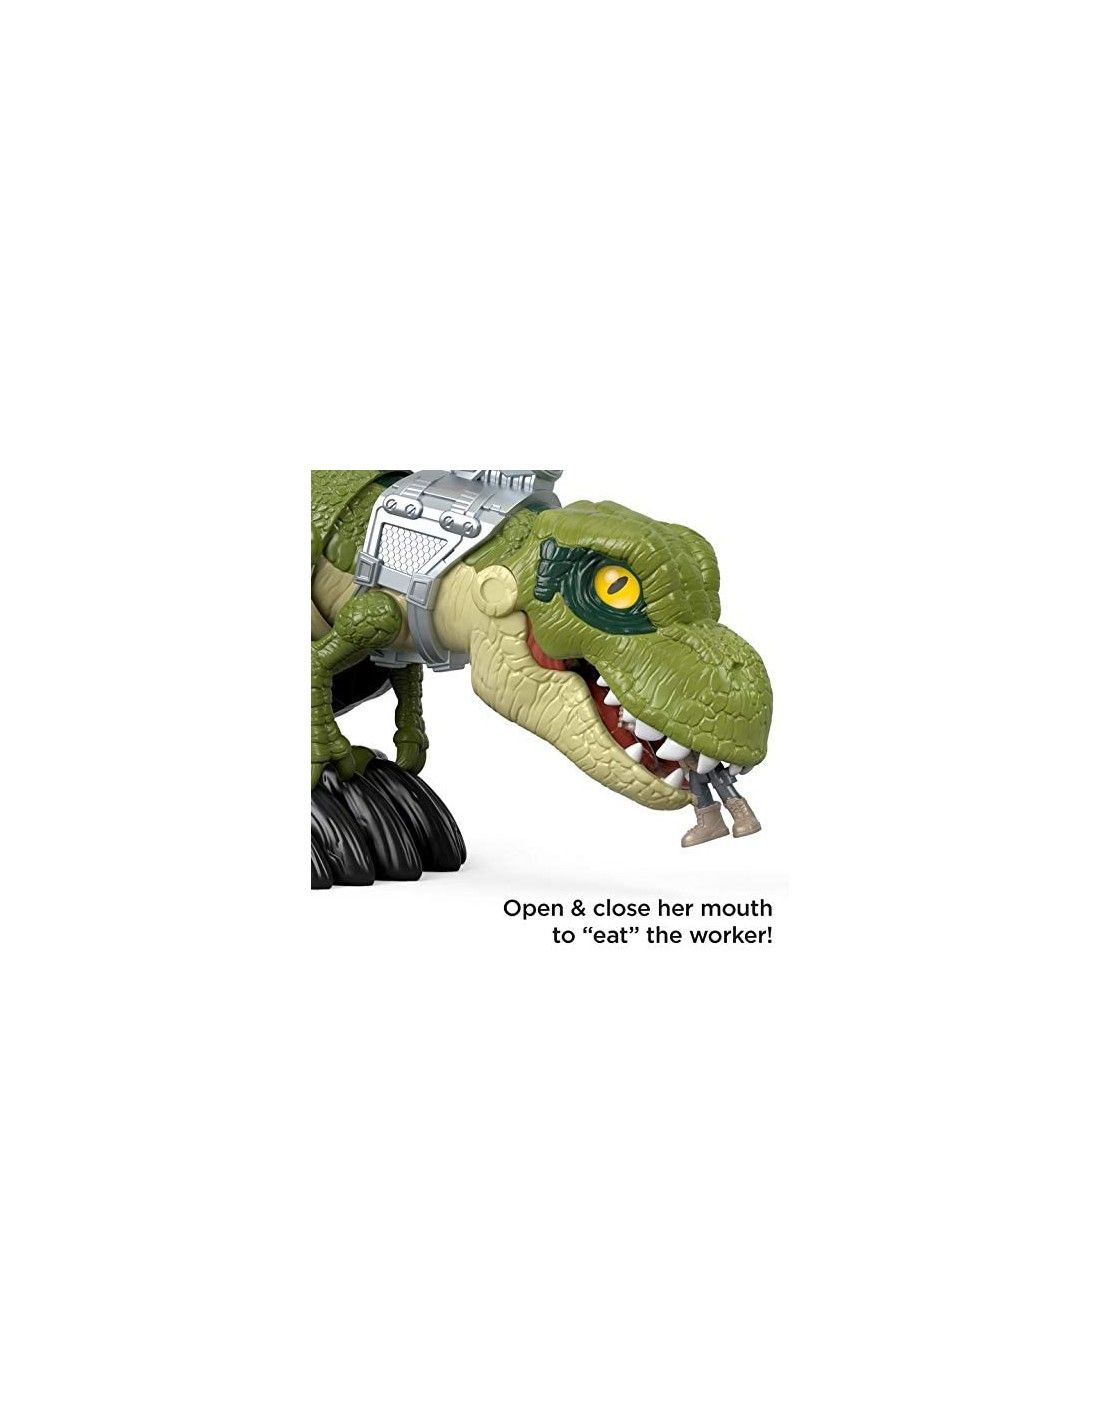 Fisher Price Jurassic World - Imaginext Mega Mouth T.Rex GBN14